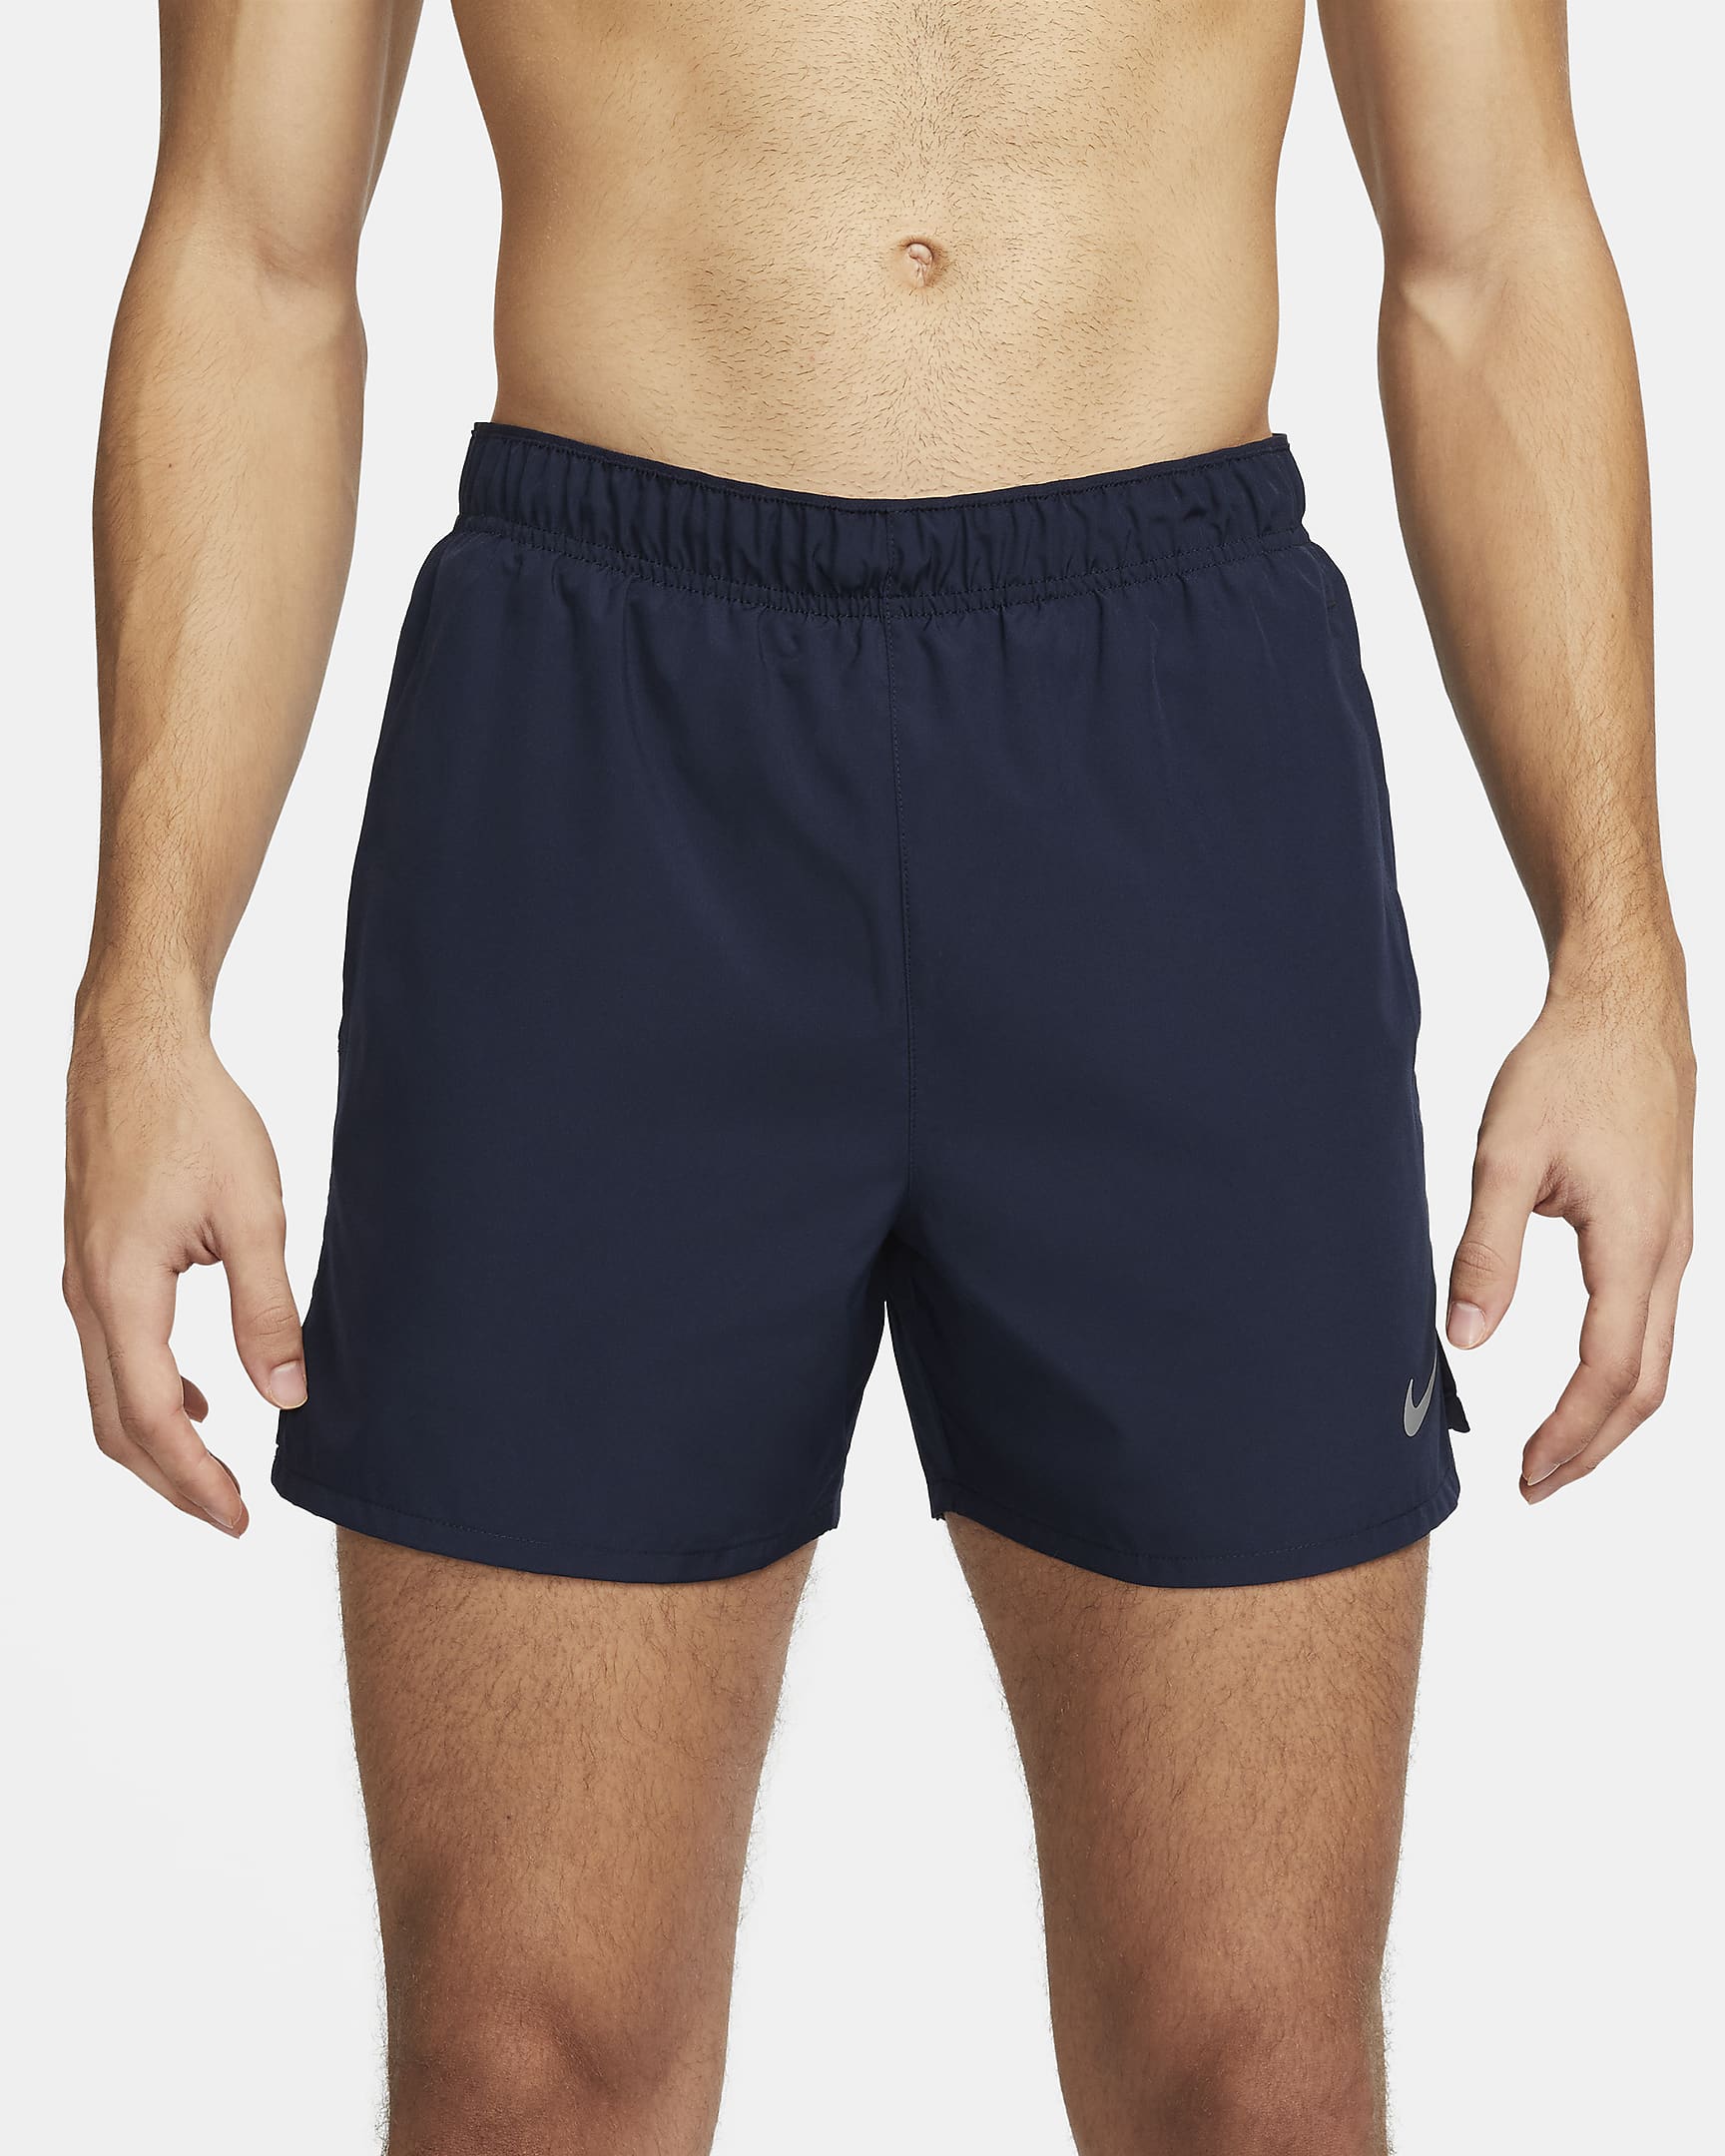 Nike Challenger Men's Dri-FIT 13cm (approx.) Brief-lined Running Shorts - Obsidian/Obsidian/Black